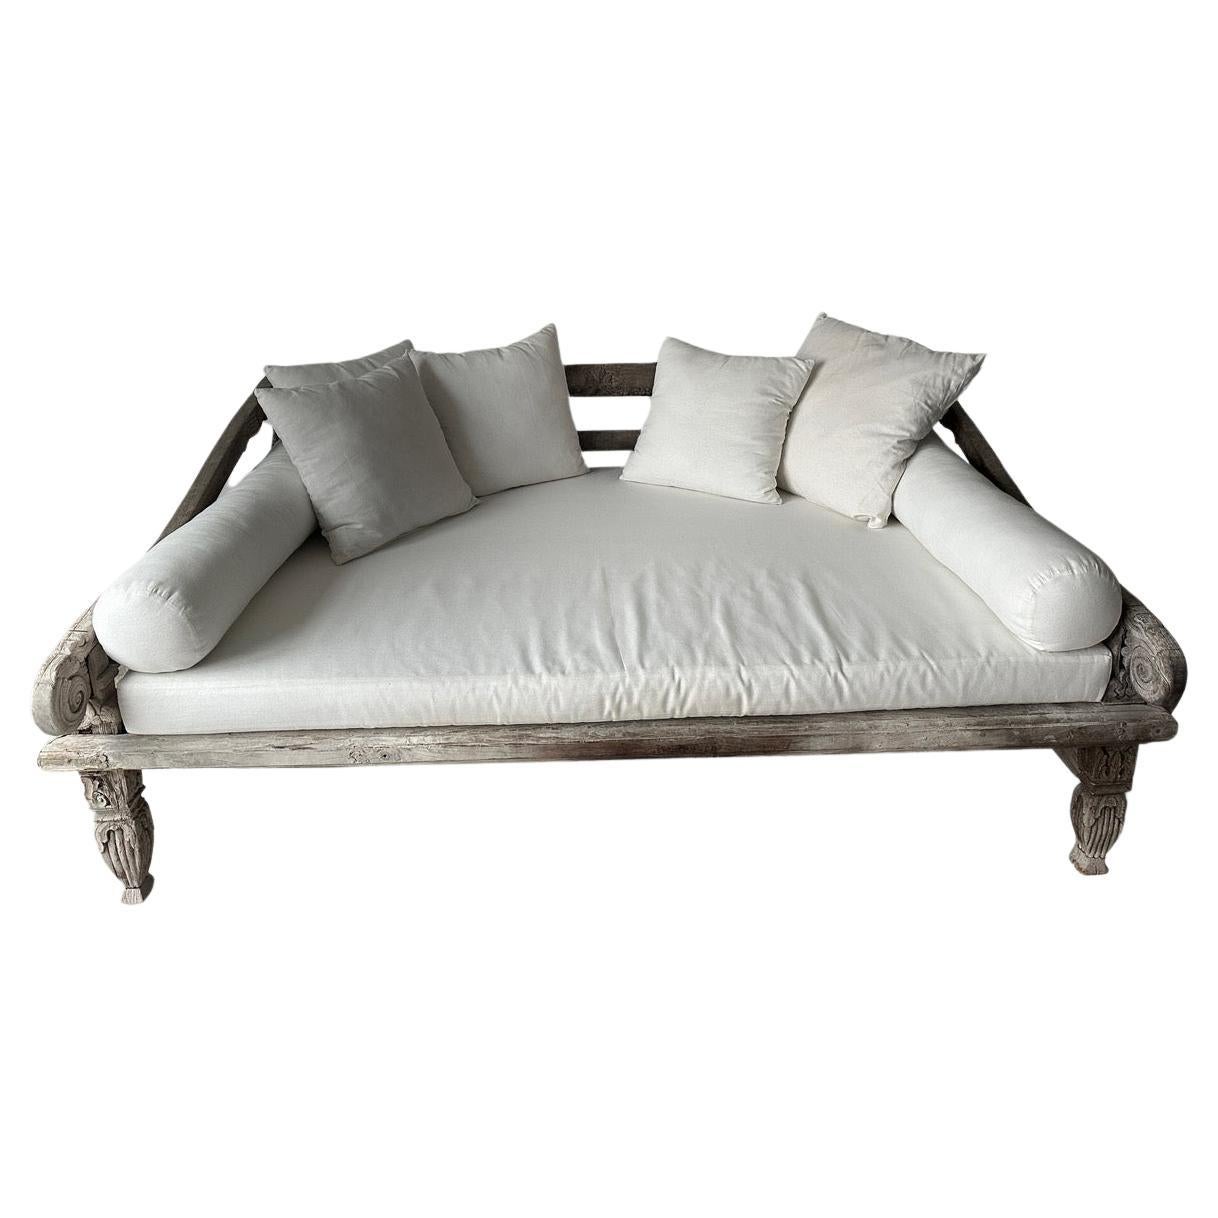 Andrianna Shamaris Museum Quality Rare Antique Day Bed For Sale